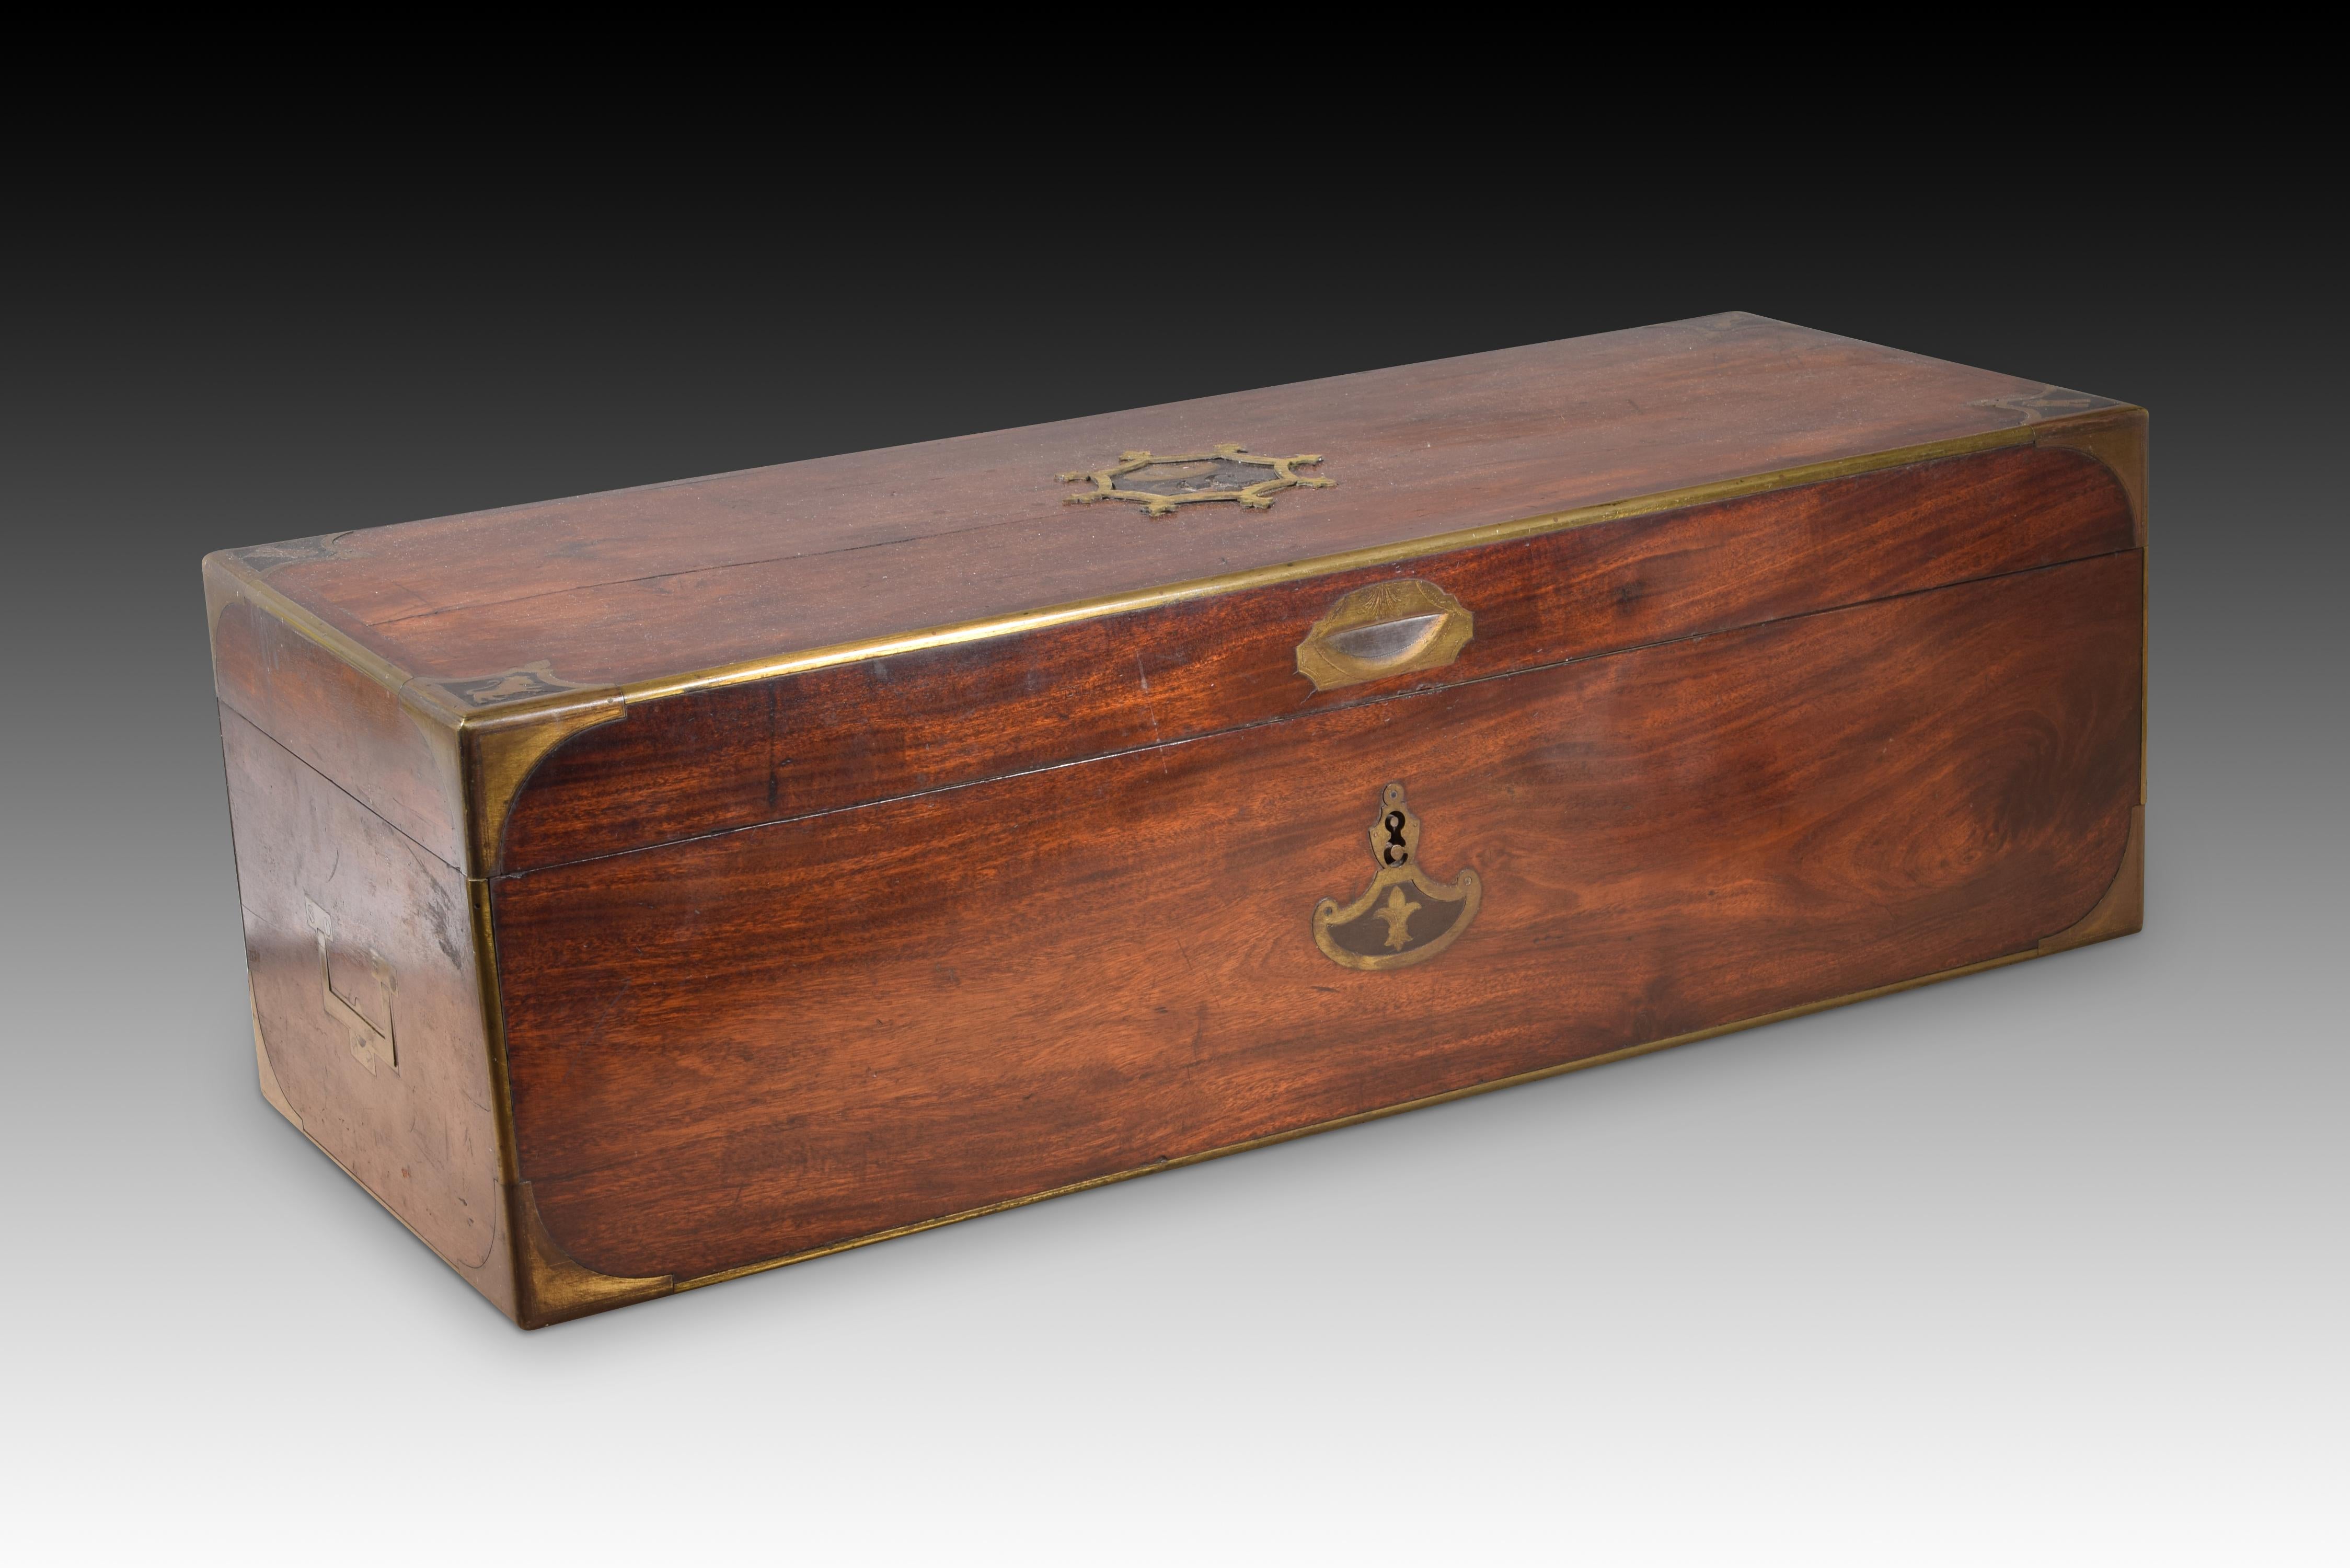 Box or casket with royal monogram. Mahogany wood, metal. Spain, 19th century. 
It has slight damage.
 Rectangular box with a flat lid and key hole on the front decorated with metal applications on the corners, edges, handles, etc. Under the key hole